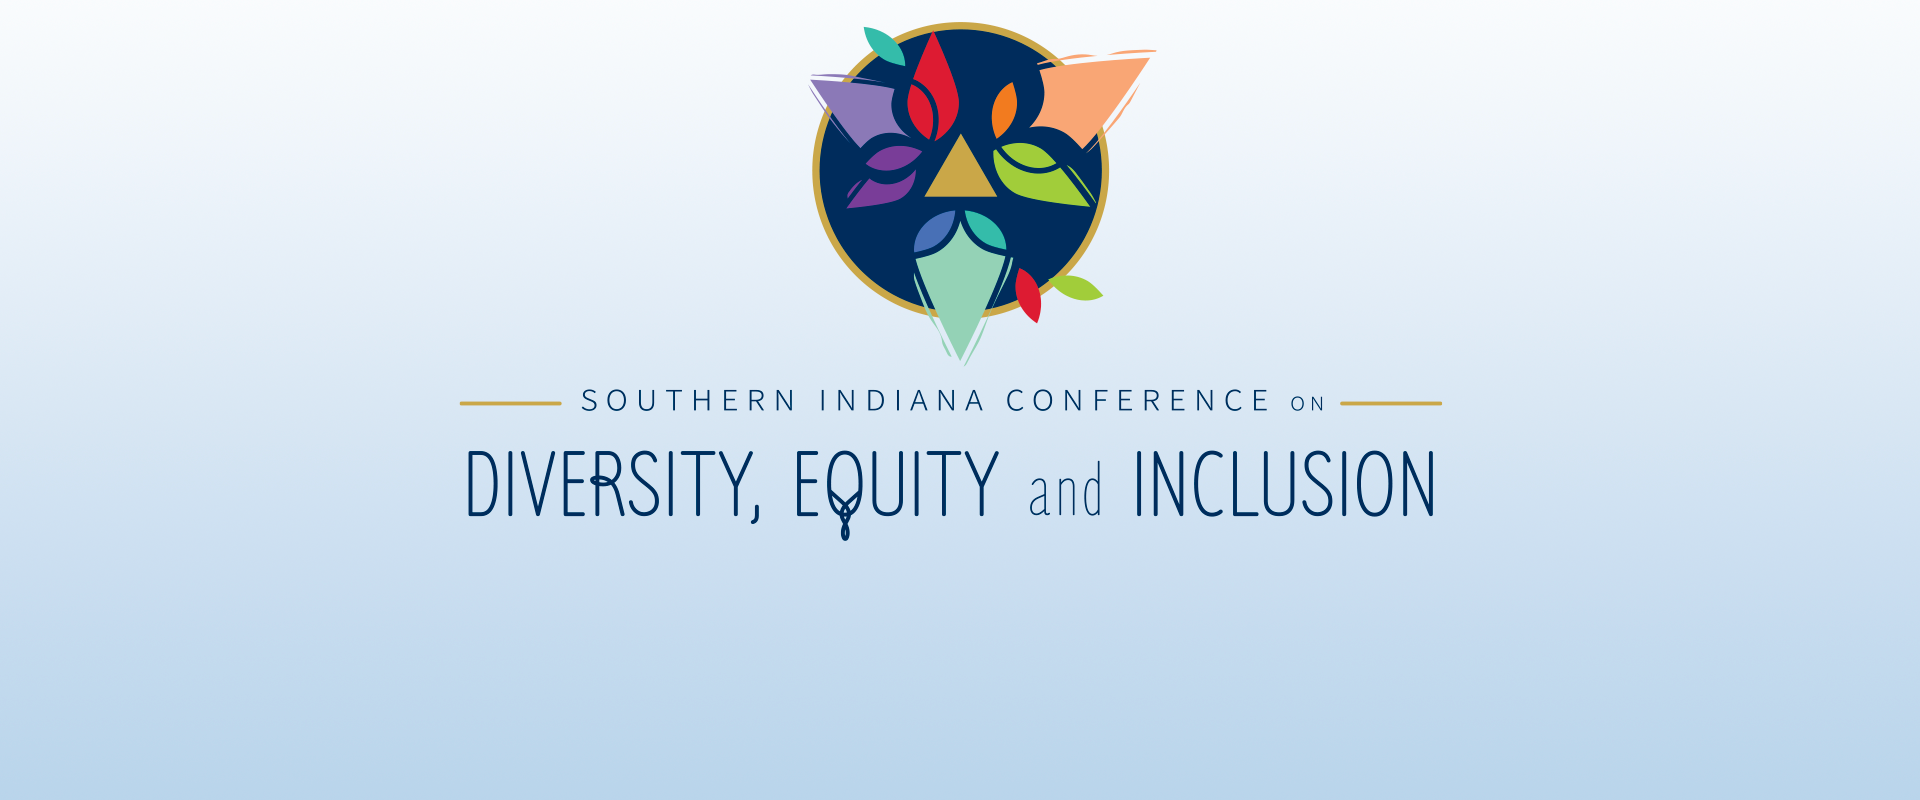 Southern Indiana Conference on Diversity, Equity, and Inclusion